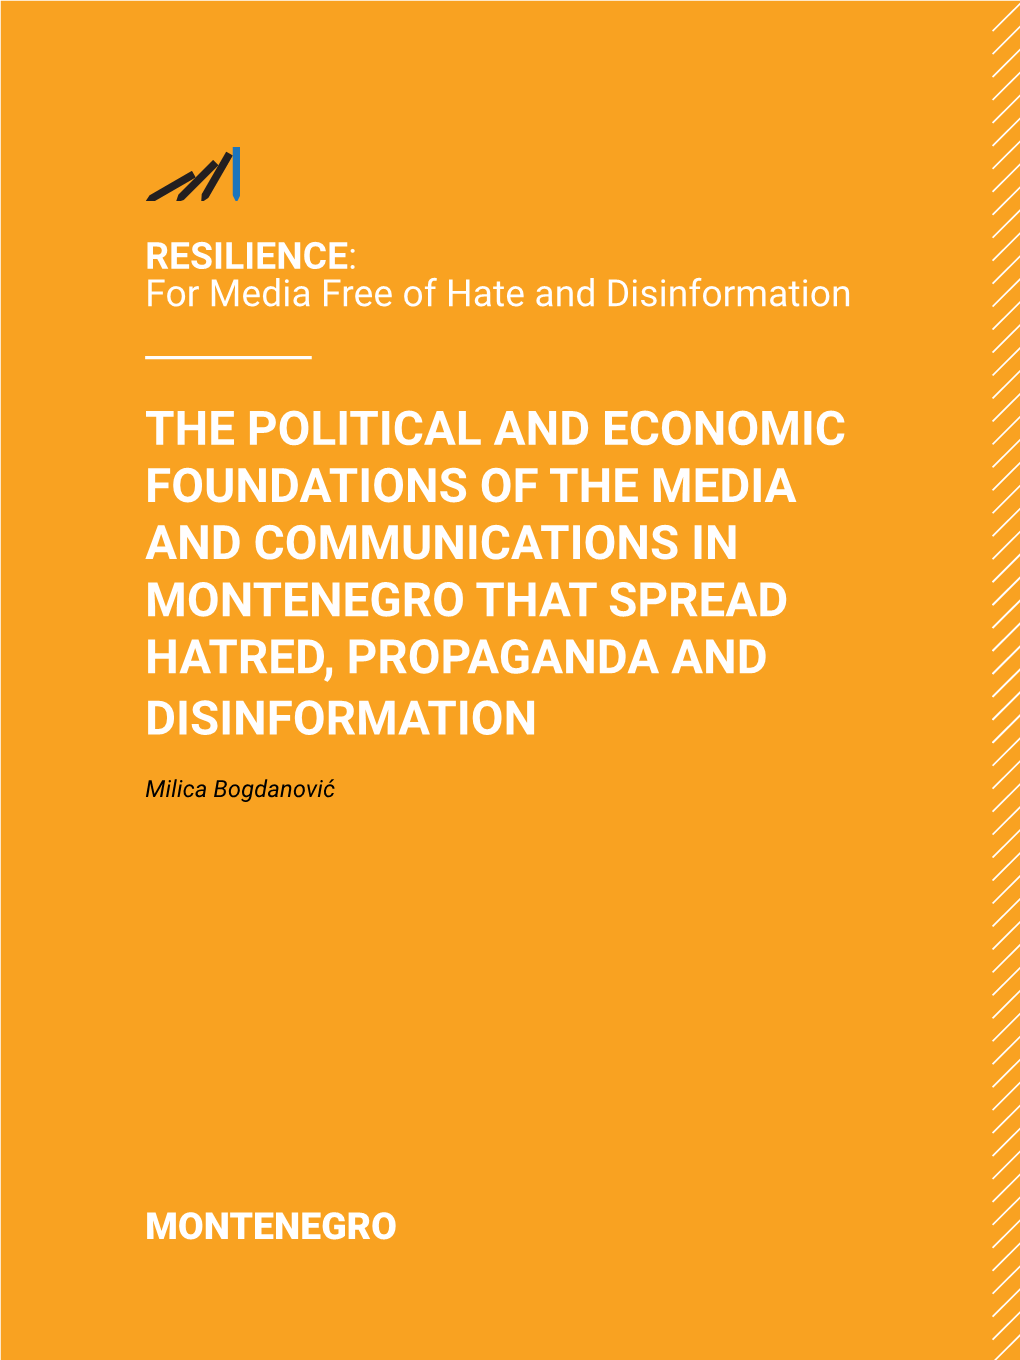 The Political and Economic Foundations of the Media and Communications in Montenegro That Spread Hatred, Propaganda and Disinformation